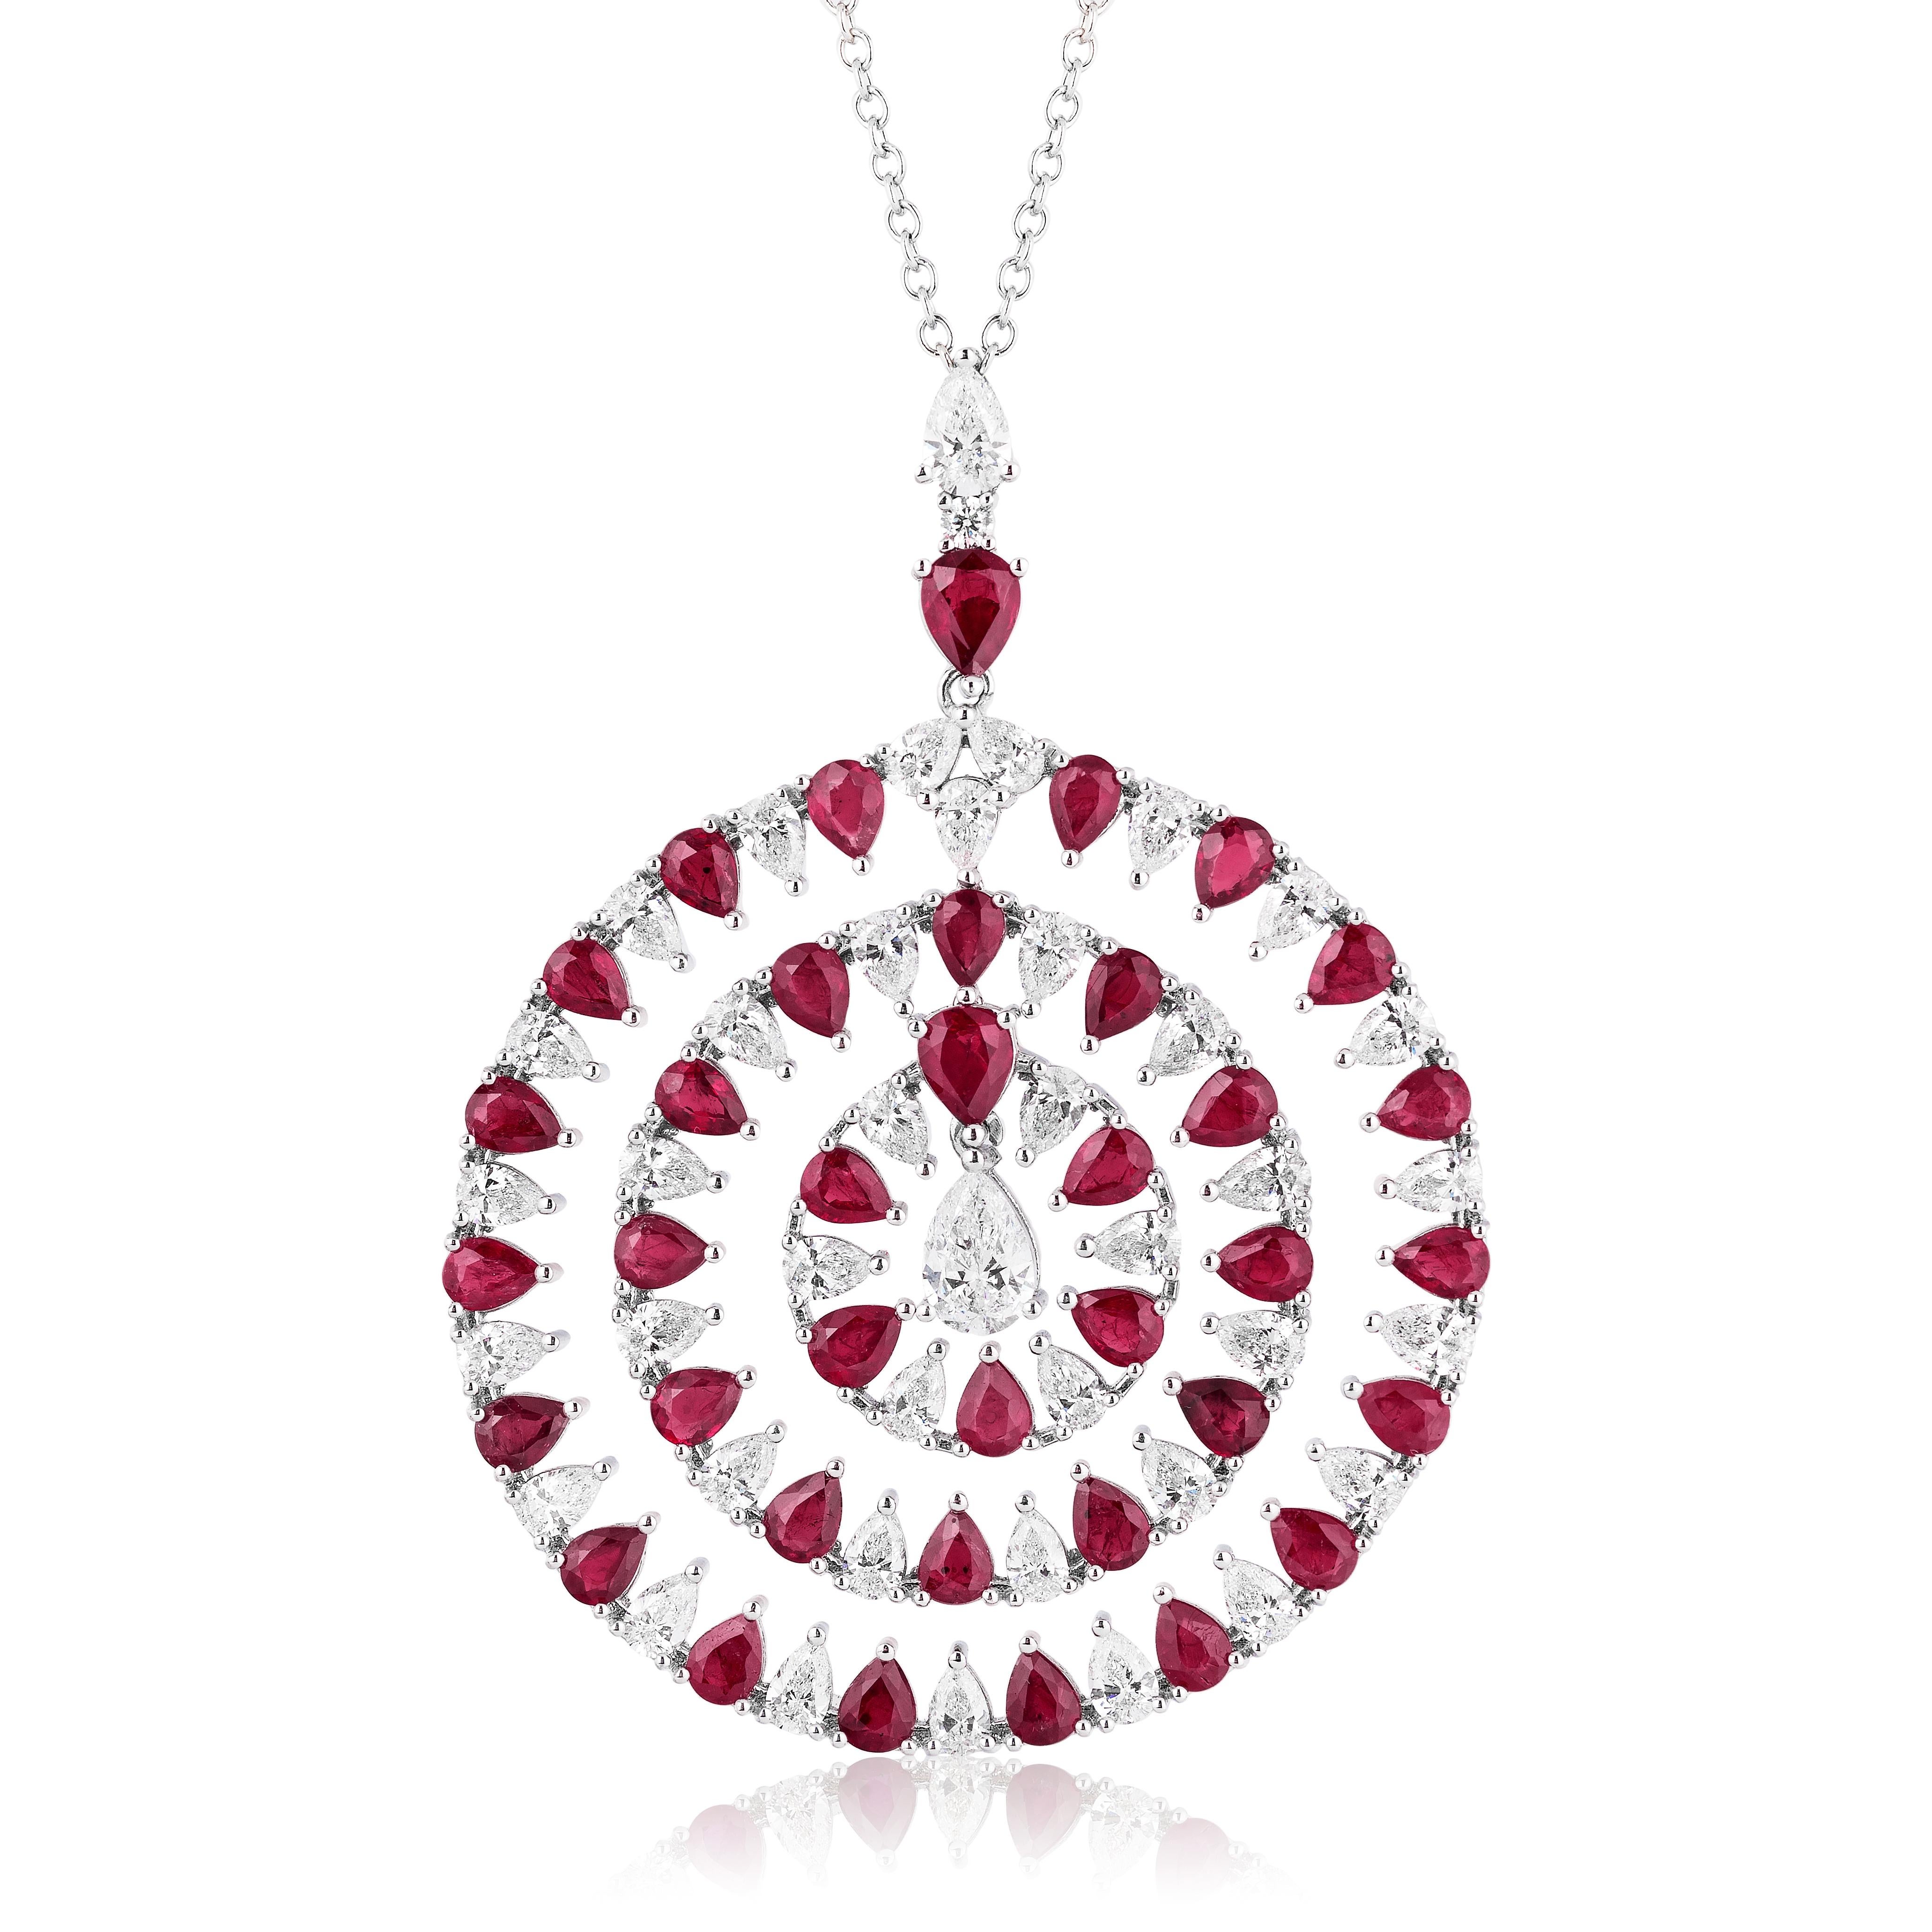 Designed for the modern woman who seeks impeccable style from day to night, elevate your ensemble with the radiant Ruby & Diamond White Gold Necklace.

Crafted from lustrous 18-karat white gold, this necklace features a stunning round pendant